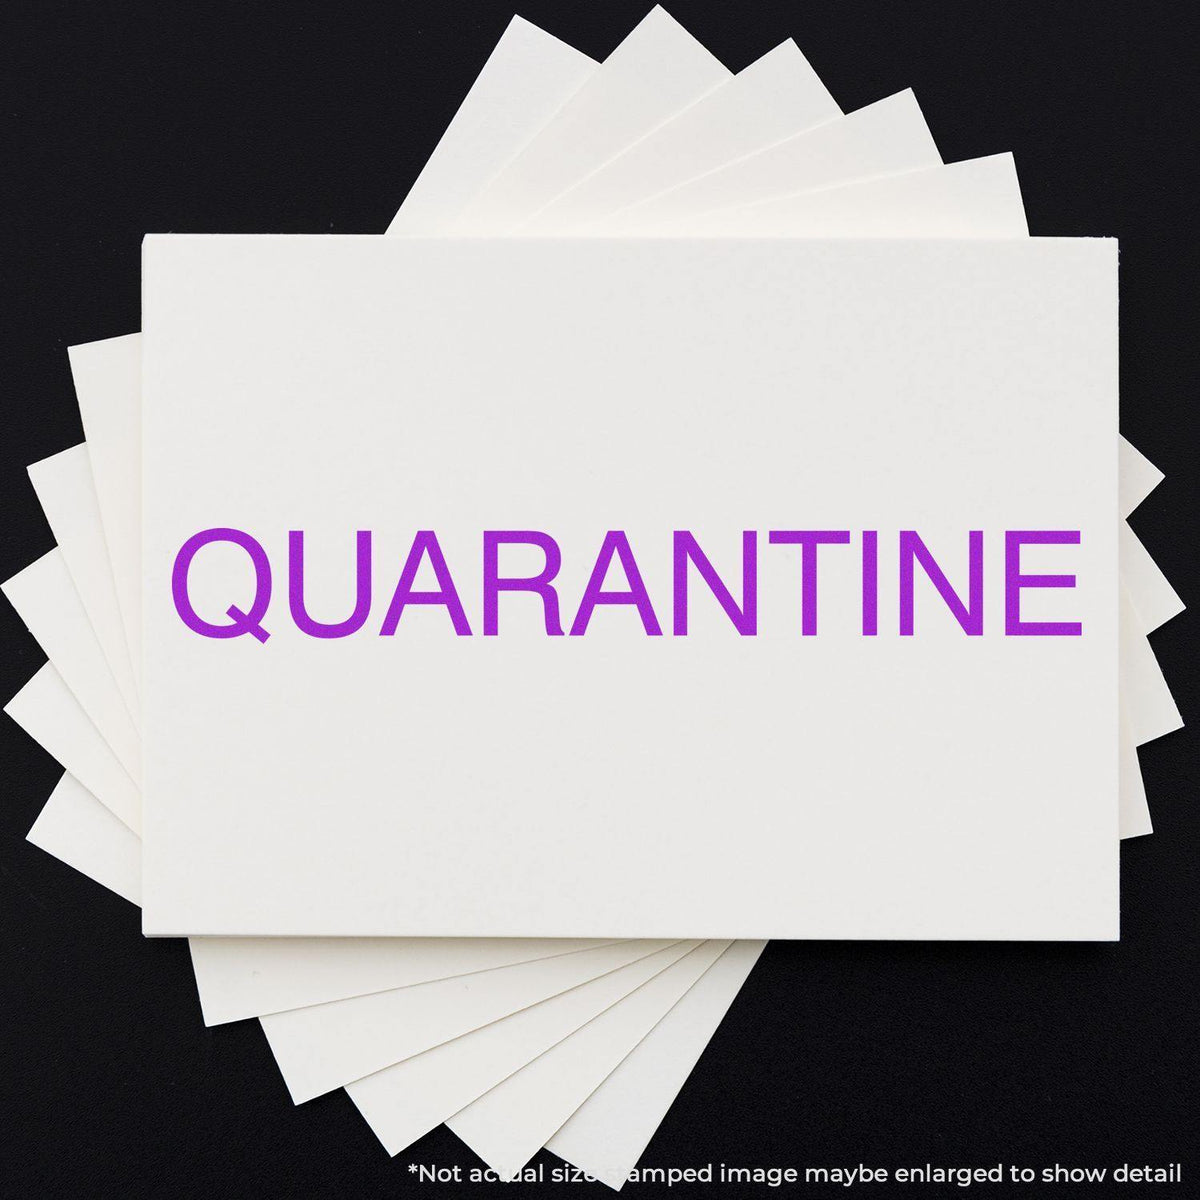 Large Quarantine Rubber Stamp In Use Photo